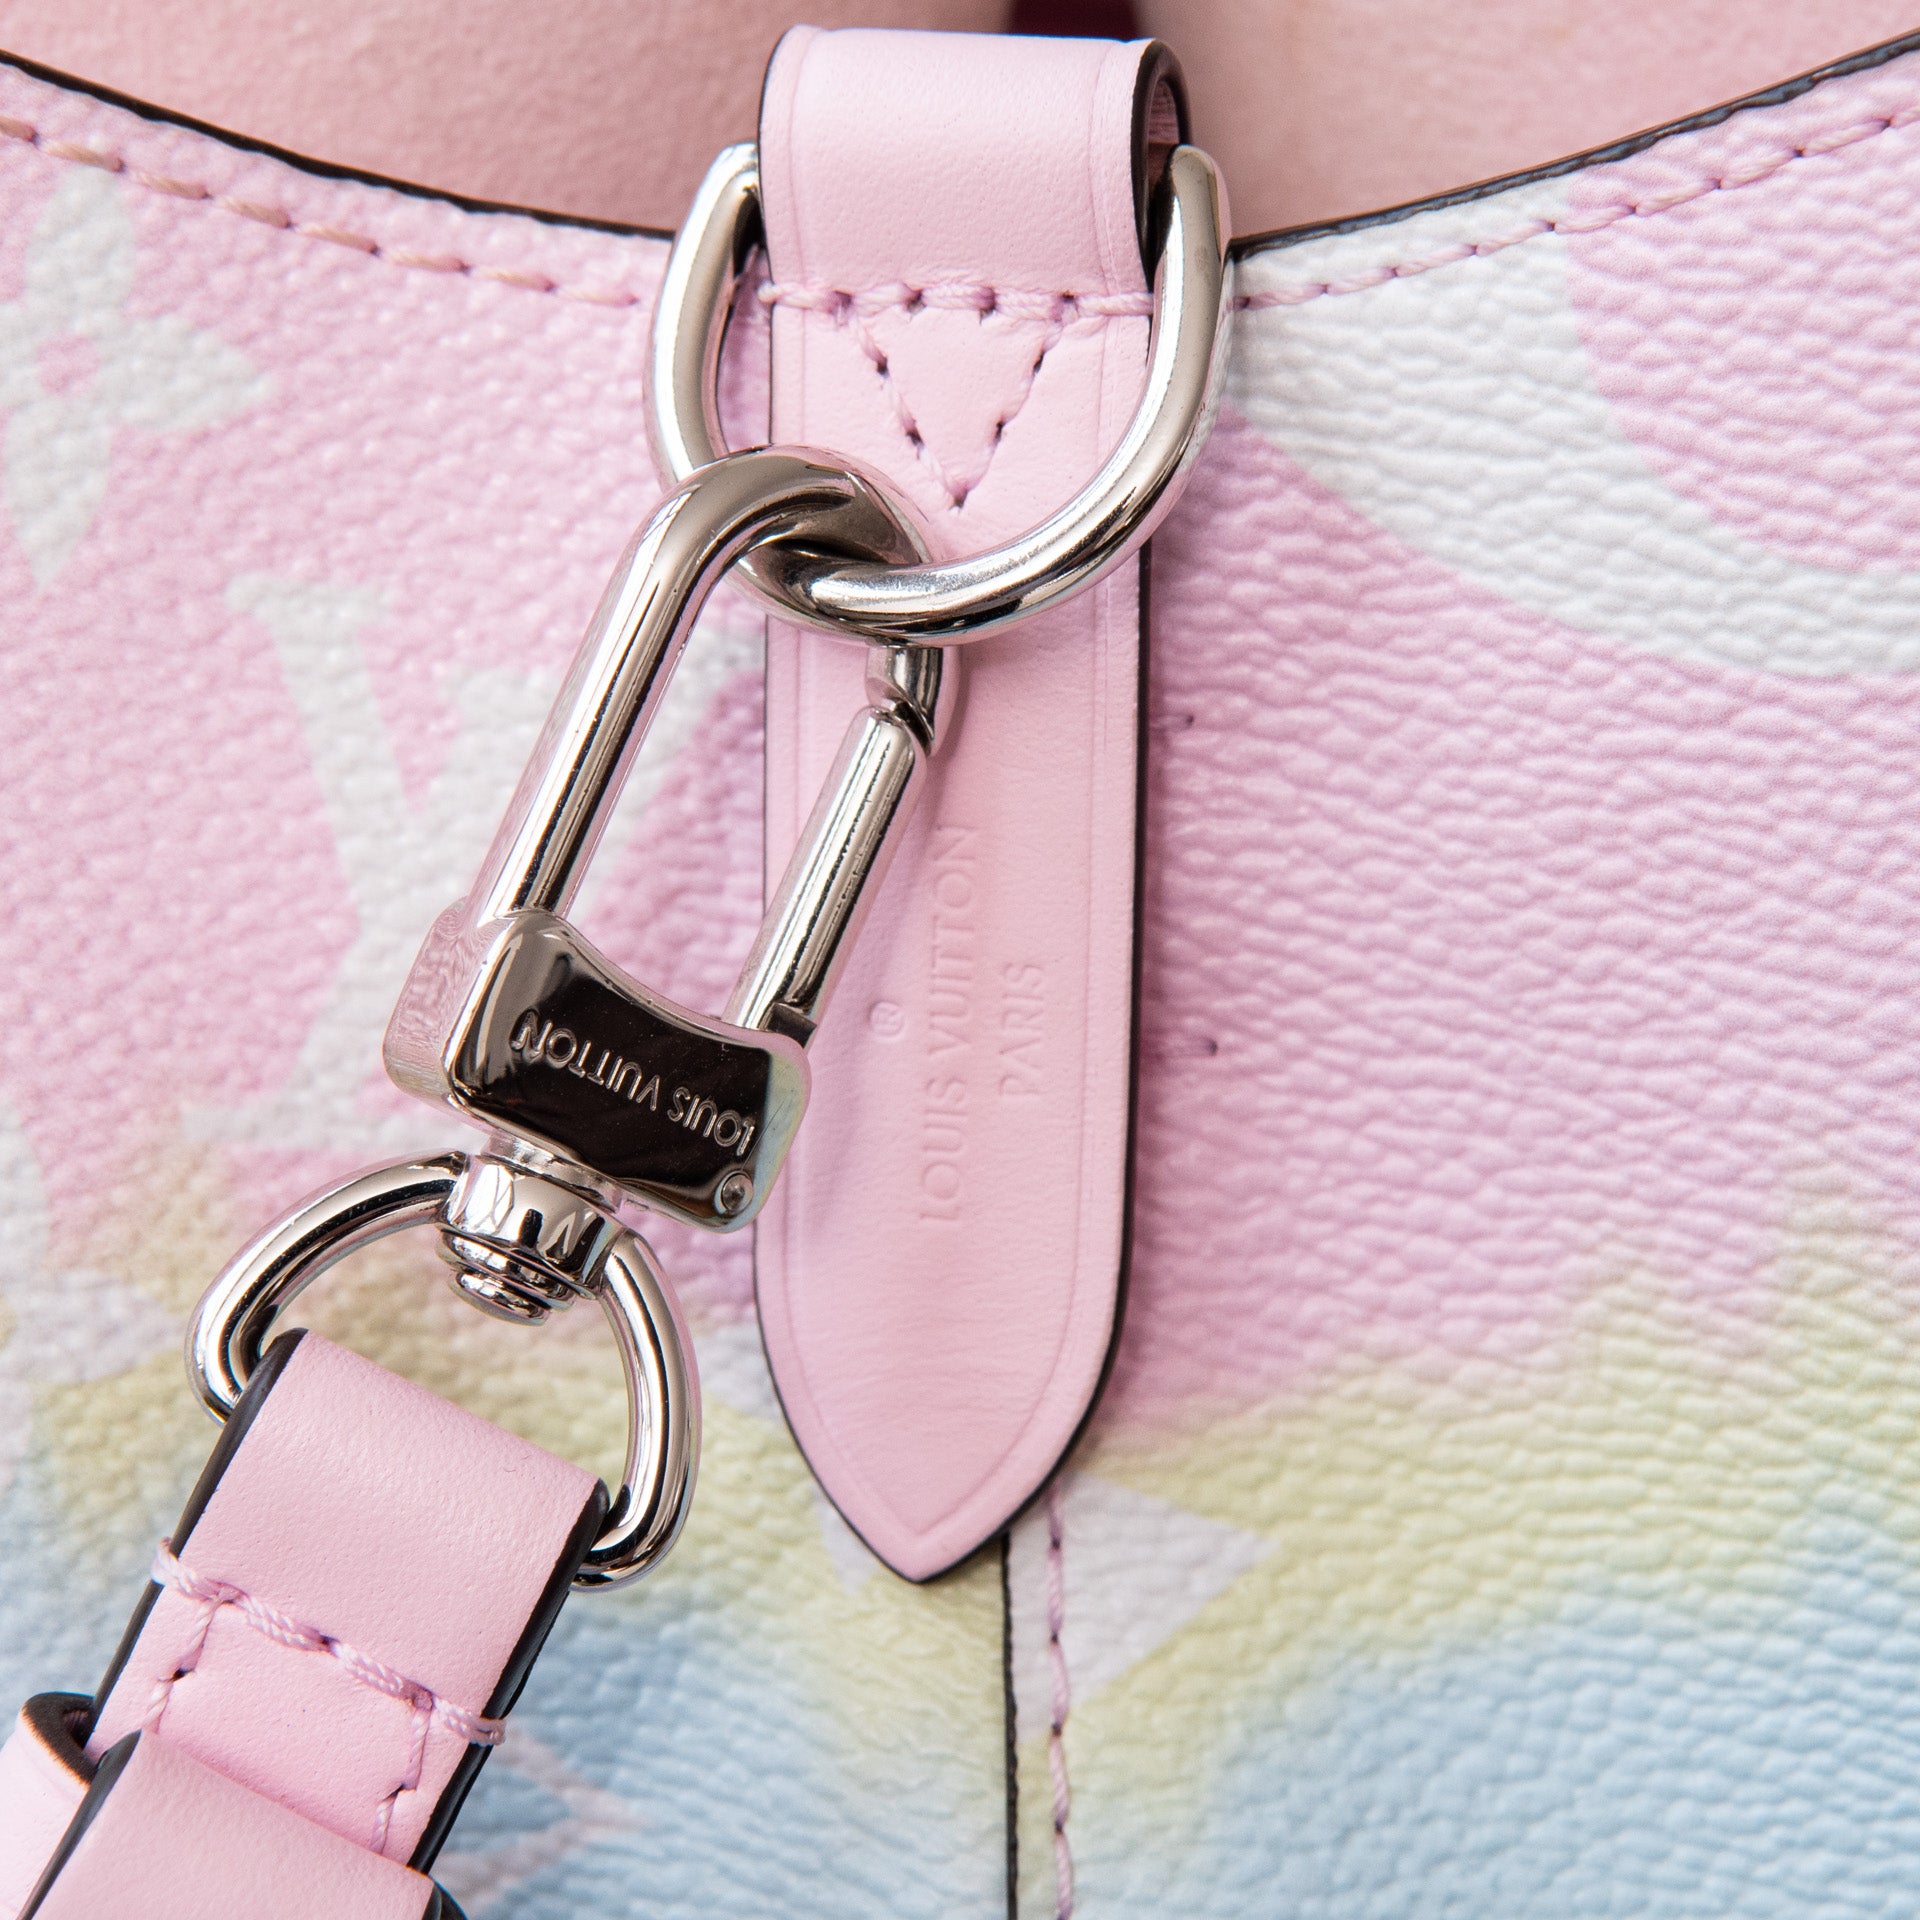 Louis Vuitton Limited Edition Neo Noe Pastel Bag - Image 7 of 12